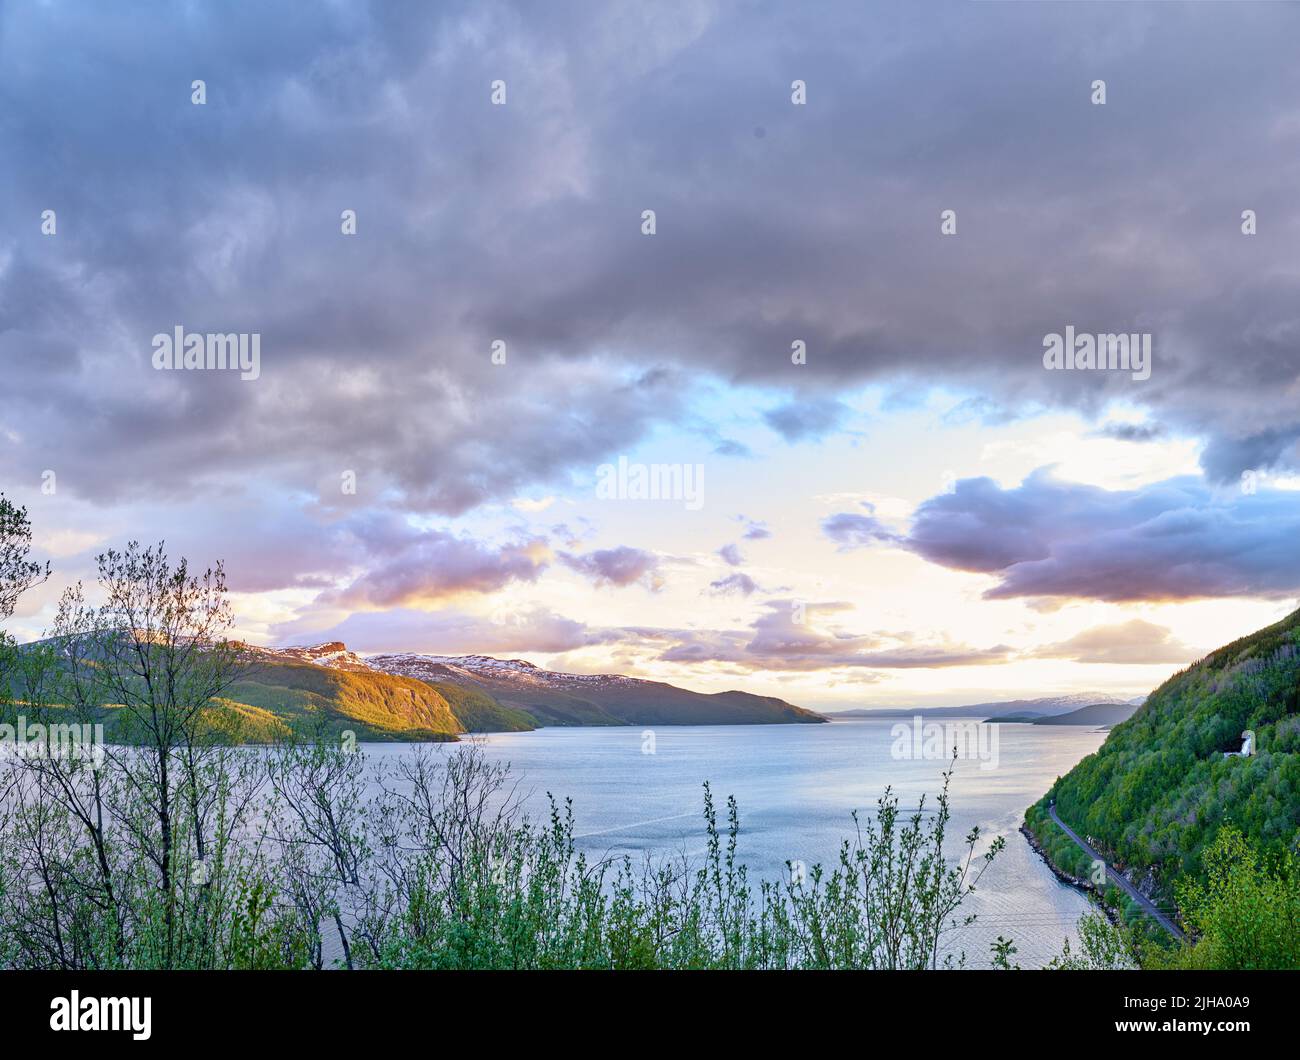 Scenic view of a lake, ocean or sea with cloudy sky at sunset and copy space.Uncultivated trees, bushes, shrubs around a bay of water in Norway Stock Photo